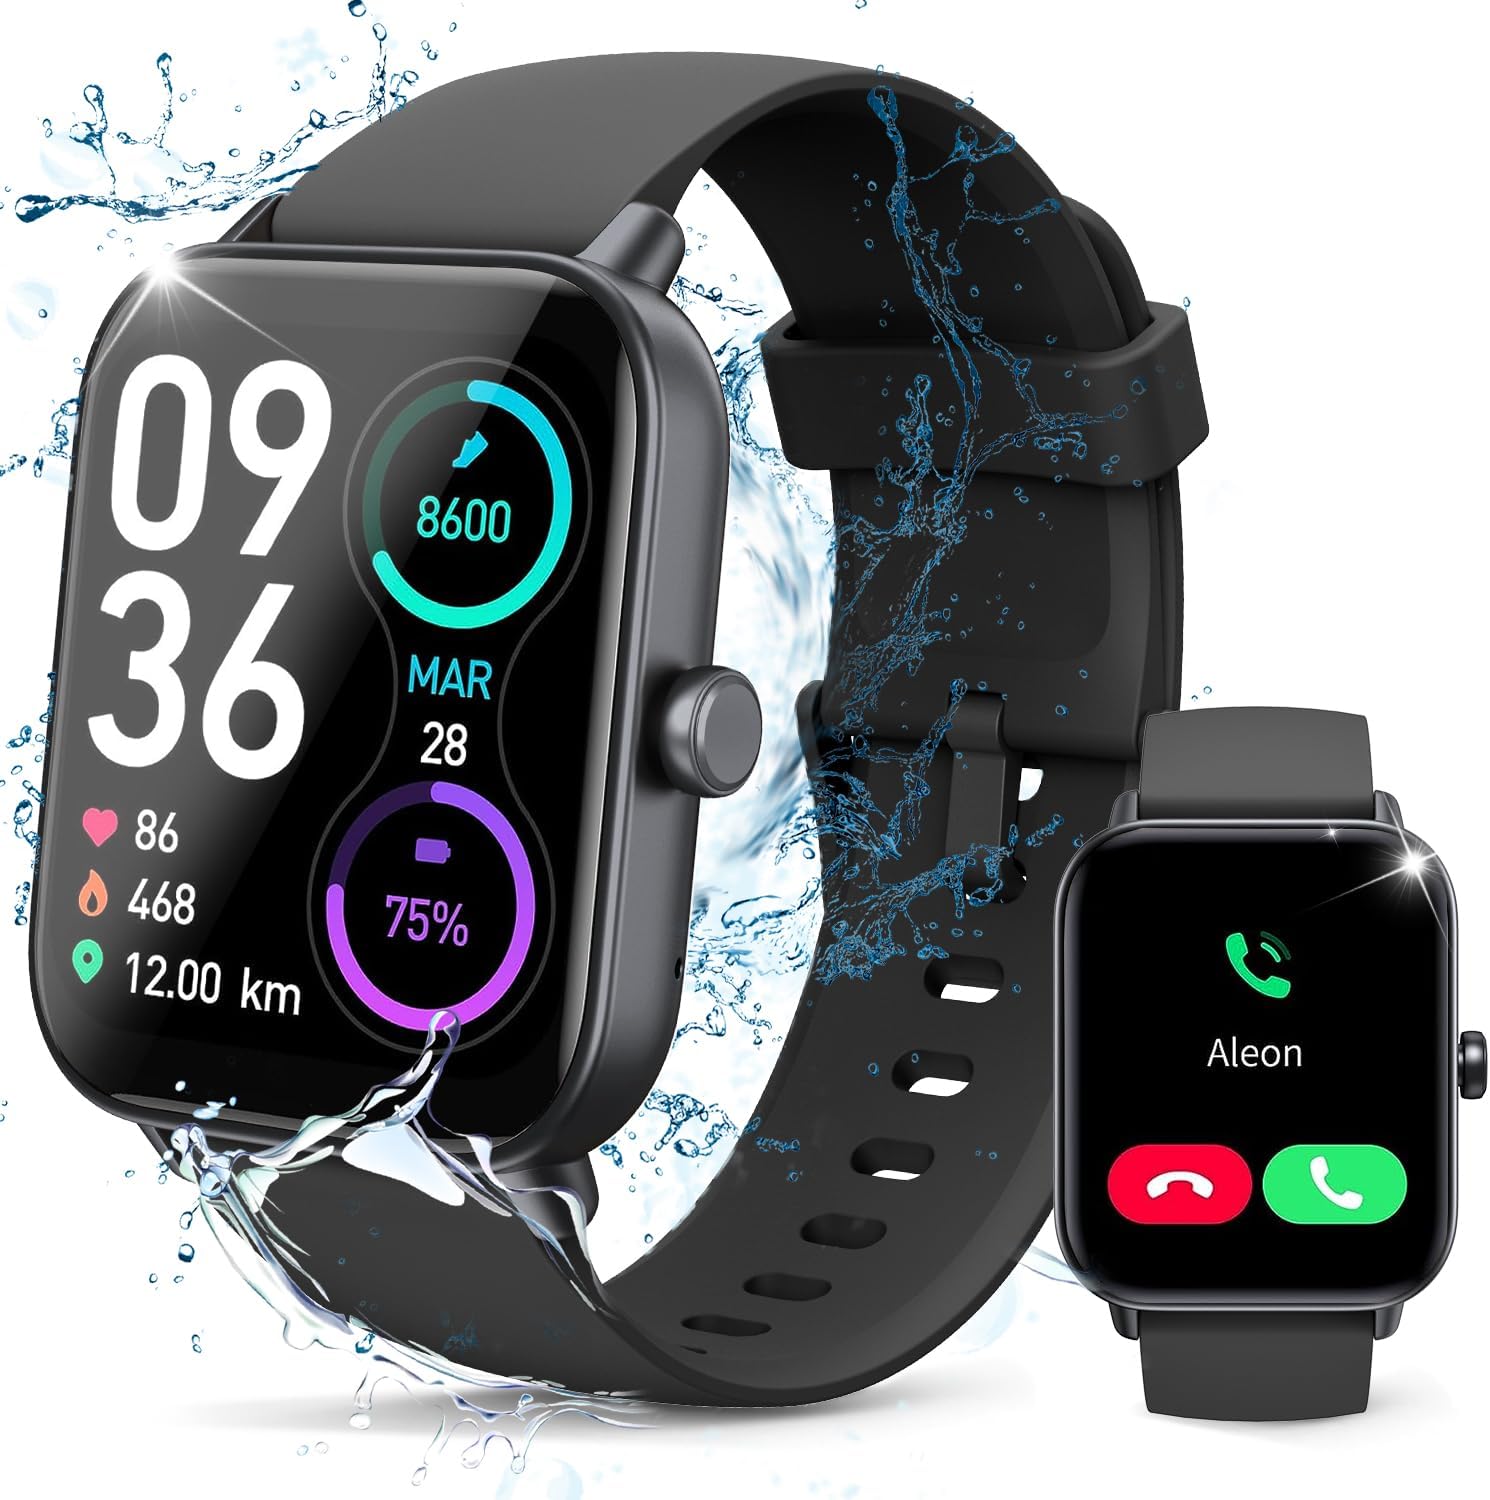 Smart Watches for Men/Women, 1.8" Alexa Built-in Smartwatch with Bluetooth Call, Heart Rate/Sleep/SpO2 Monitor, IP68 Waterproof 100+ Sport Fitness Trackers, Compatible with Android & iPhone